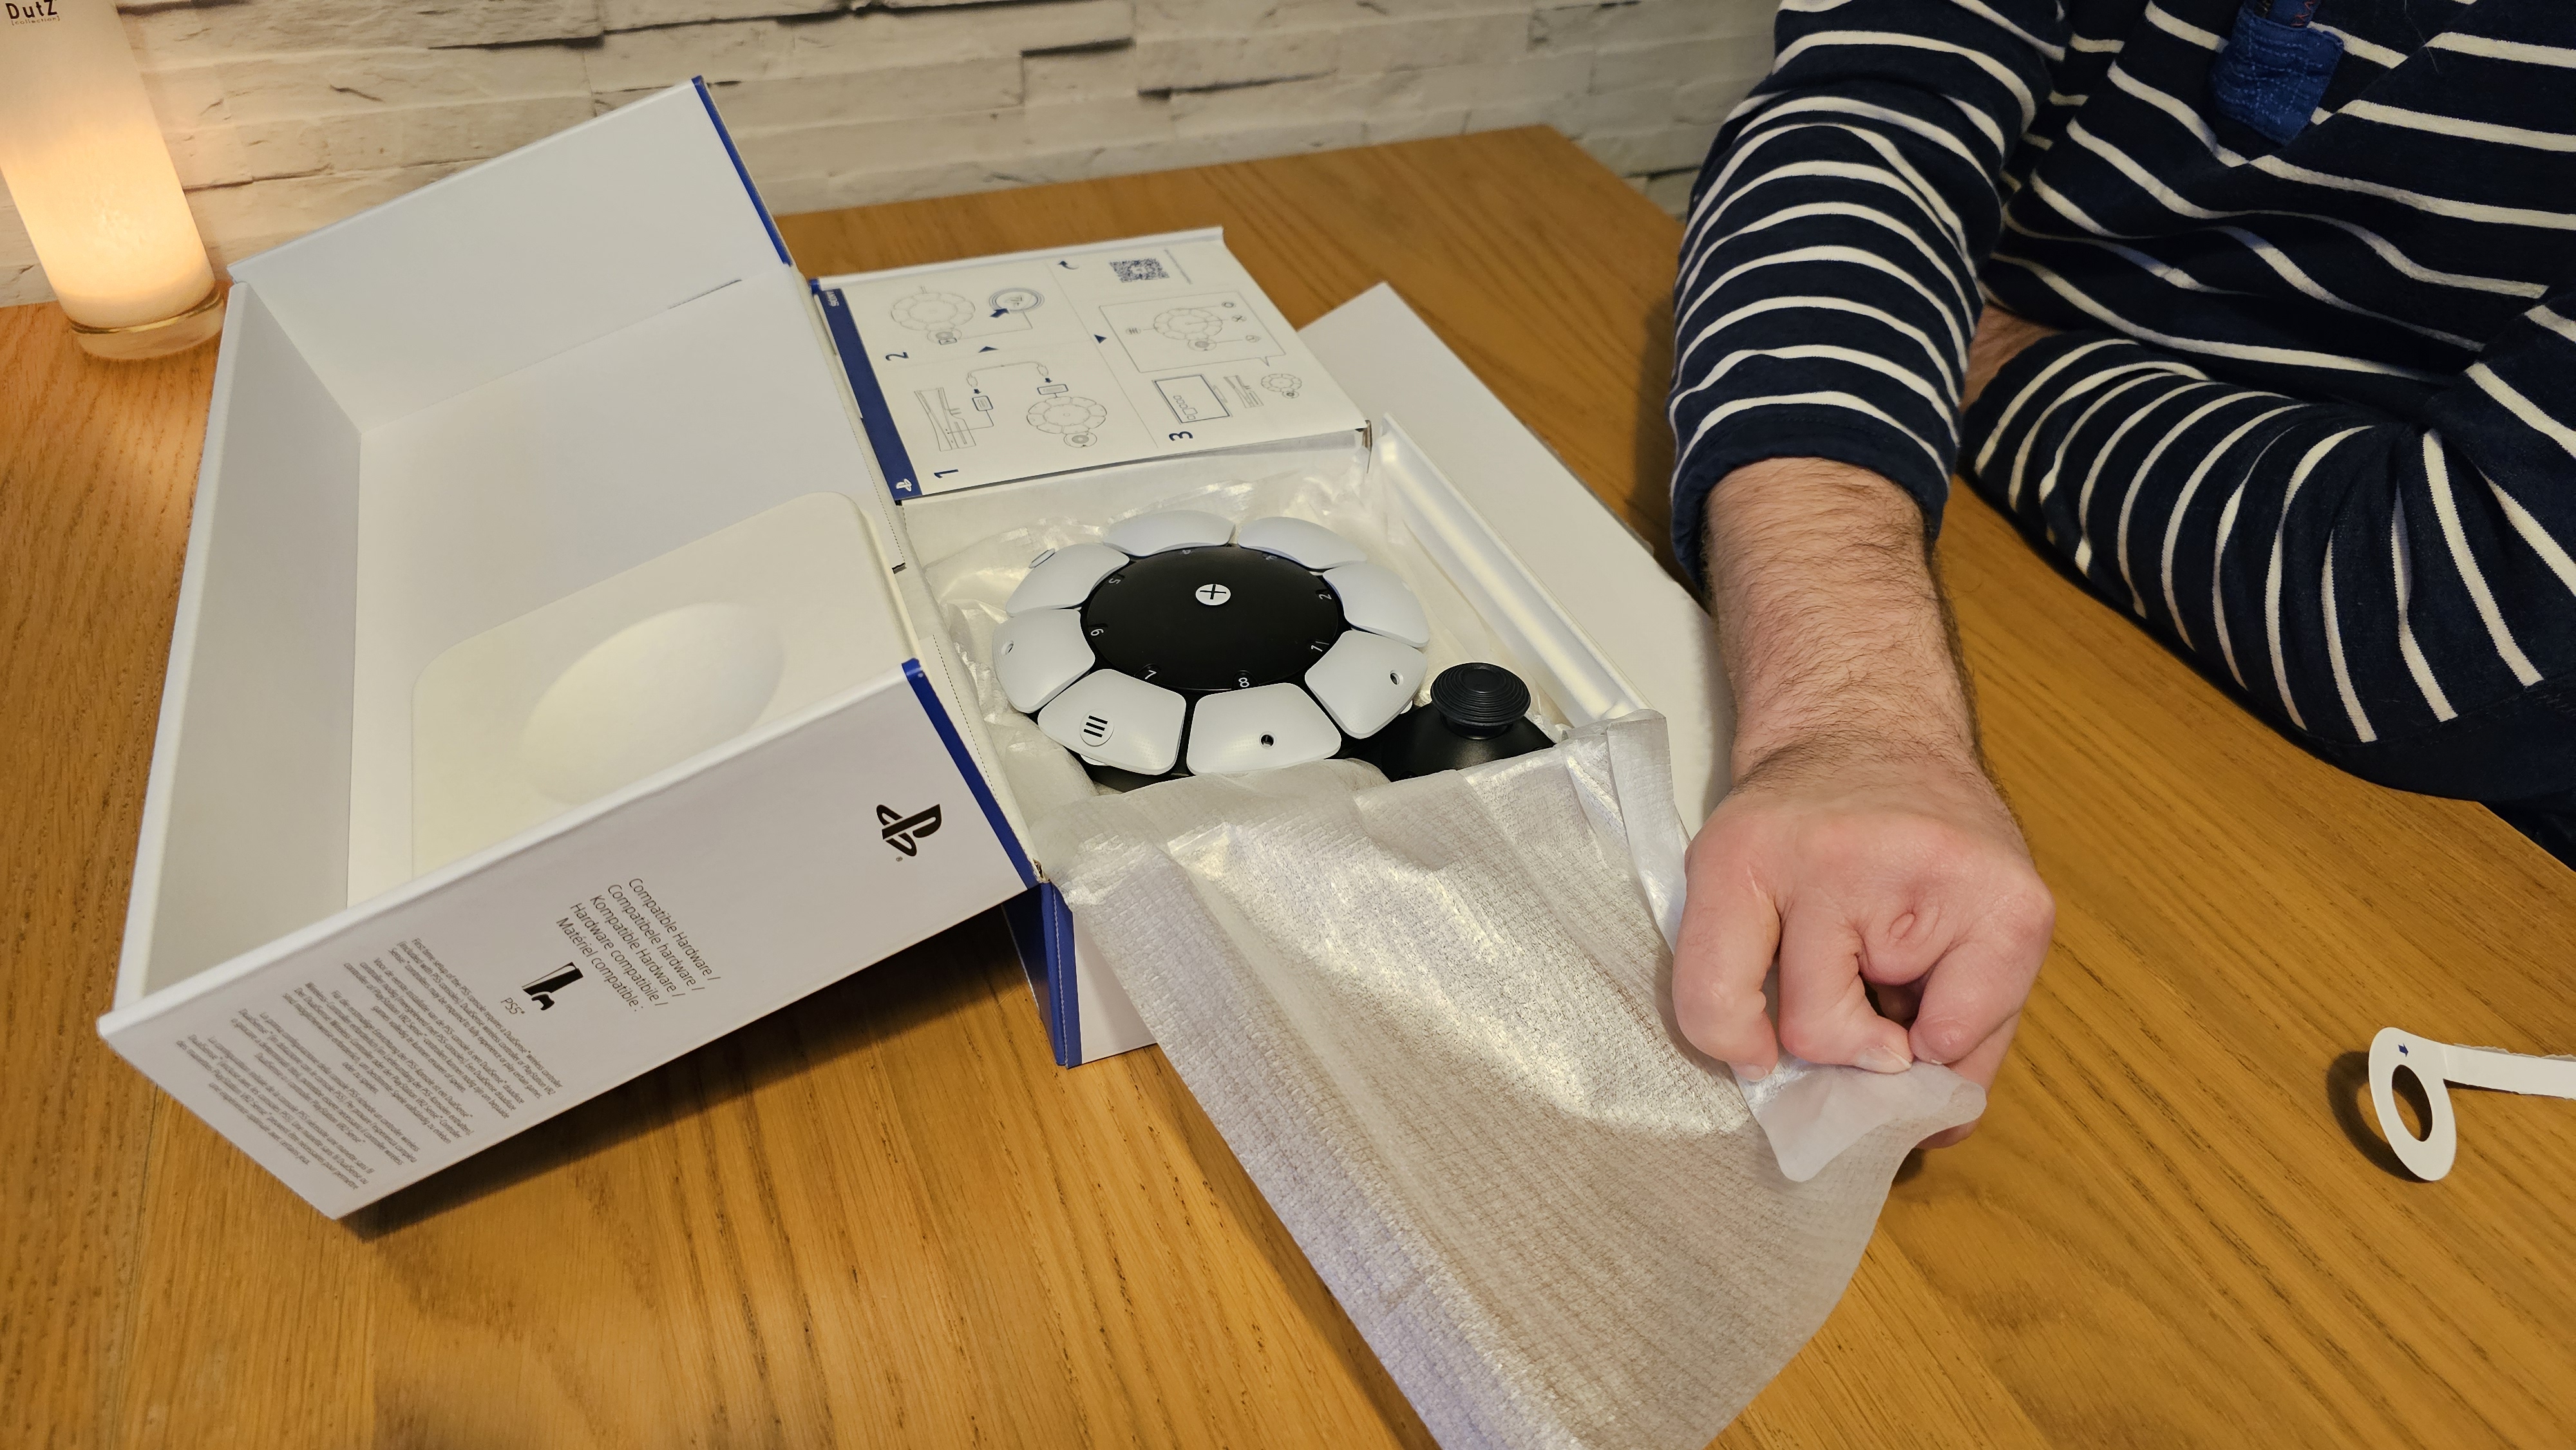 Unboxing the PlayStation Access controller with one hand on a wooden surface